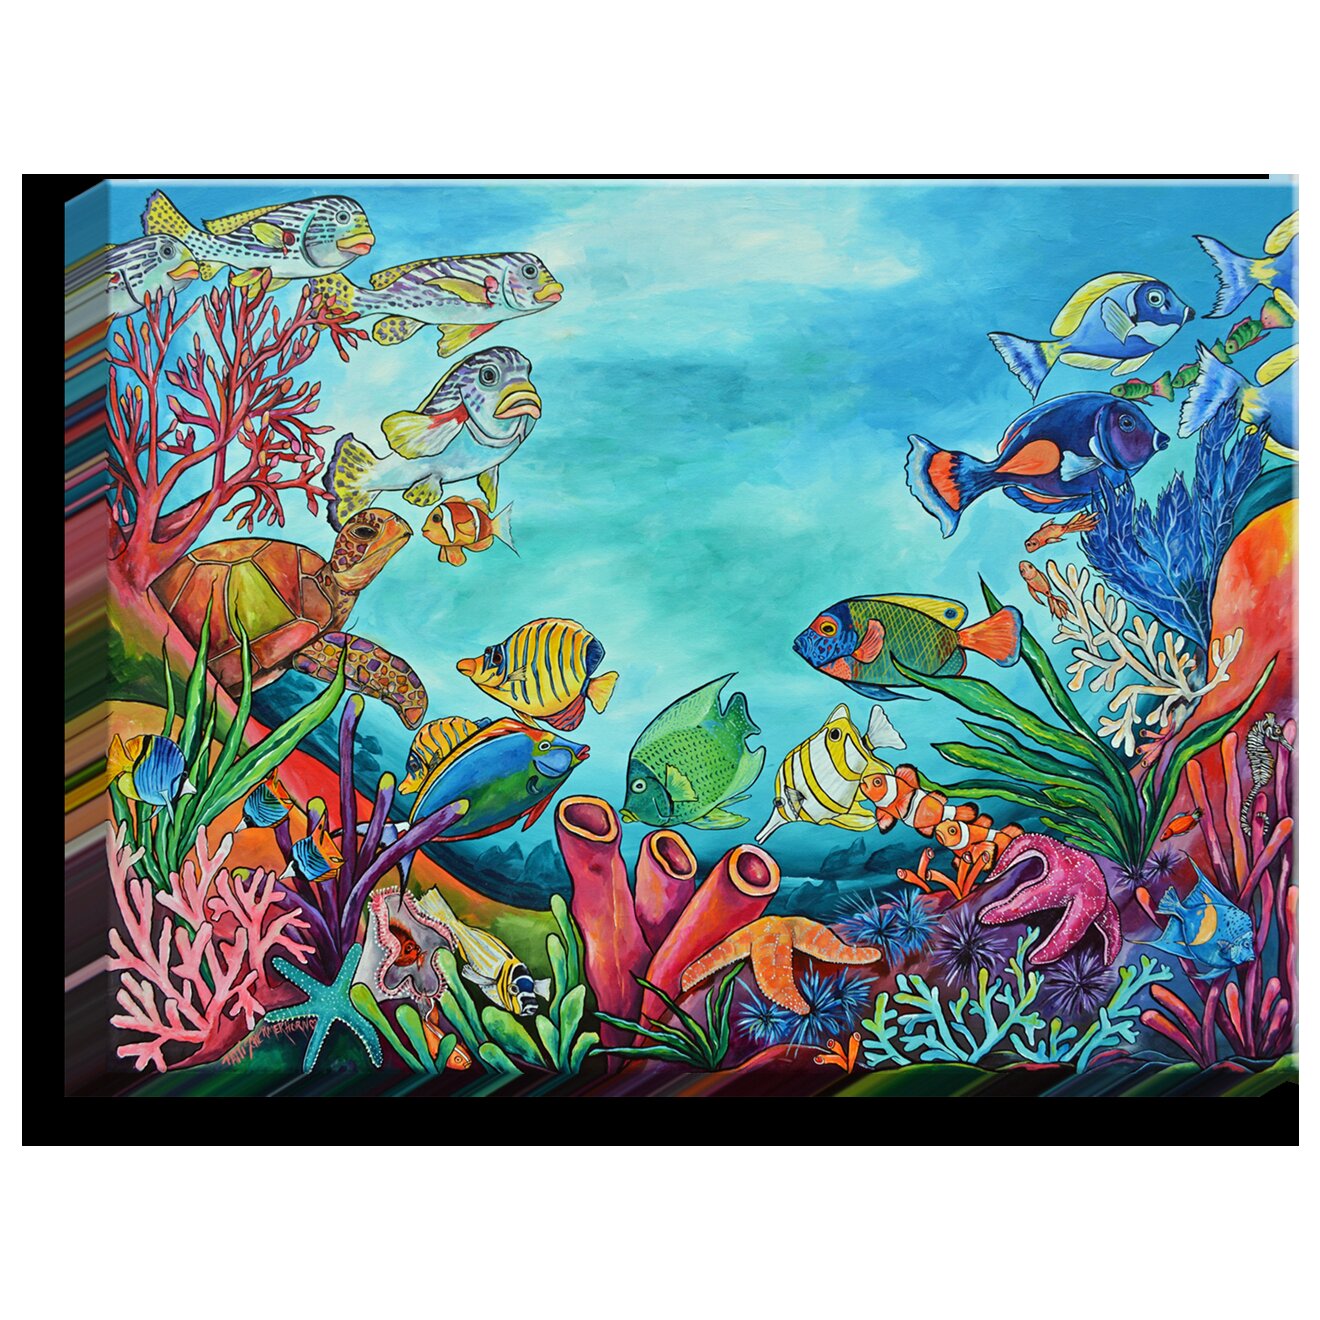 Dianochedesigns Coral Reef By Patti Schermerhorn Painting Print On Wrapped Canvas Wayfair